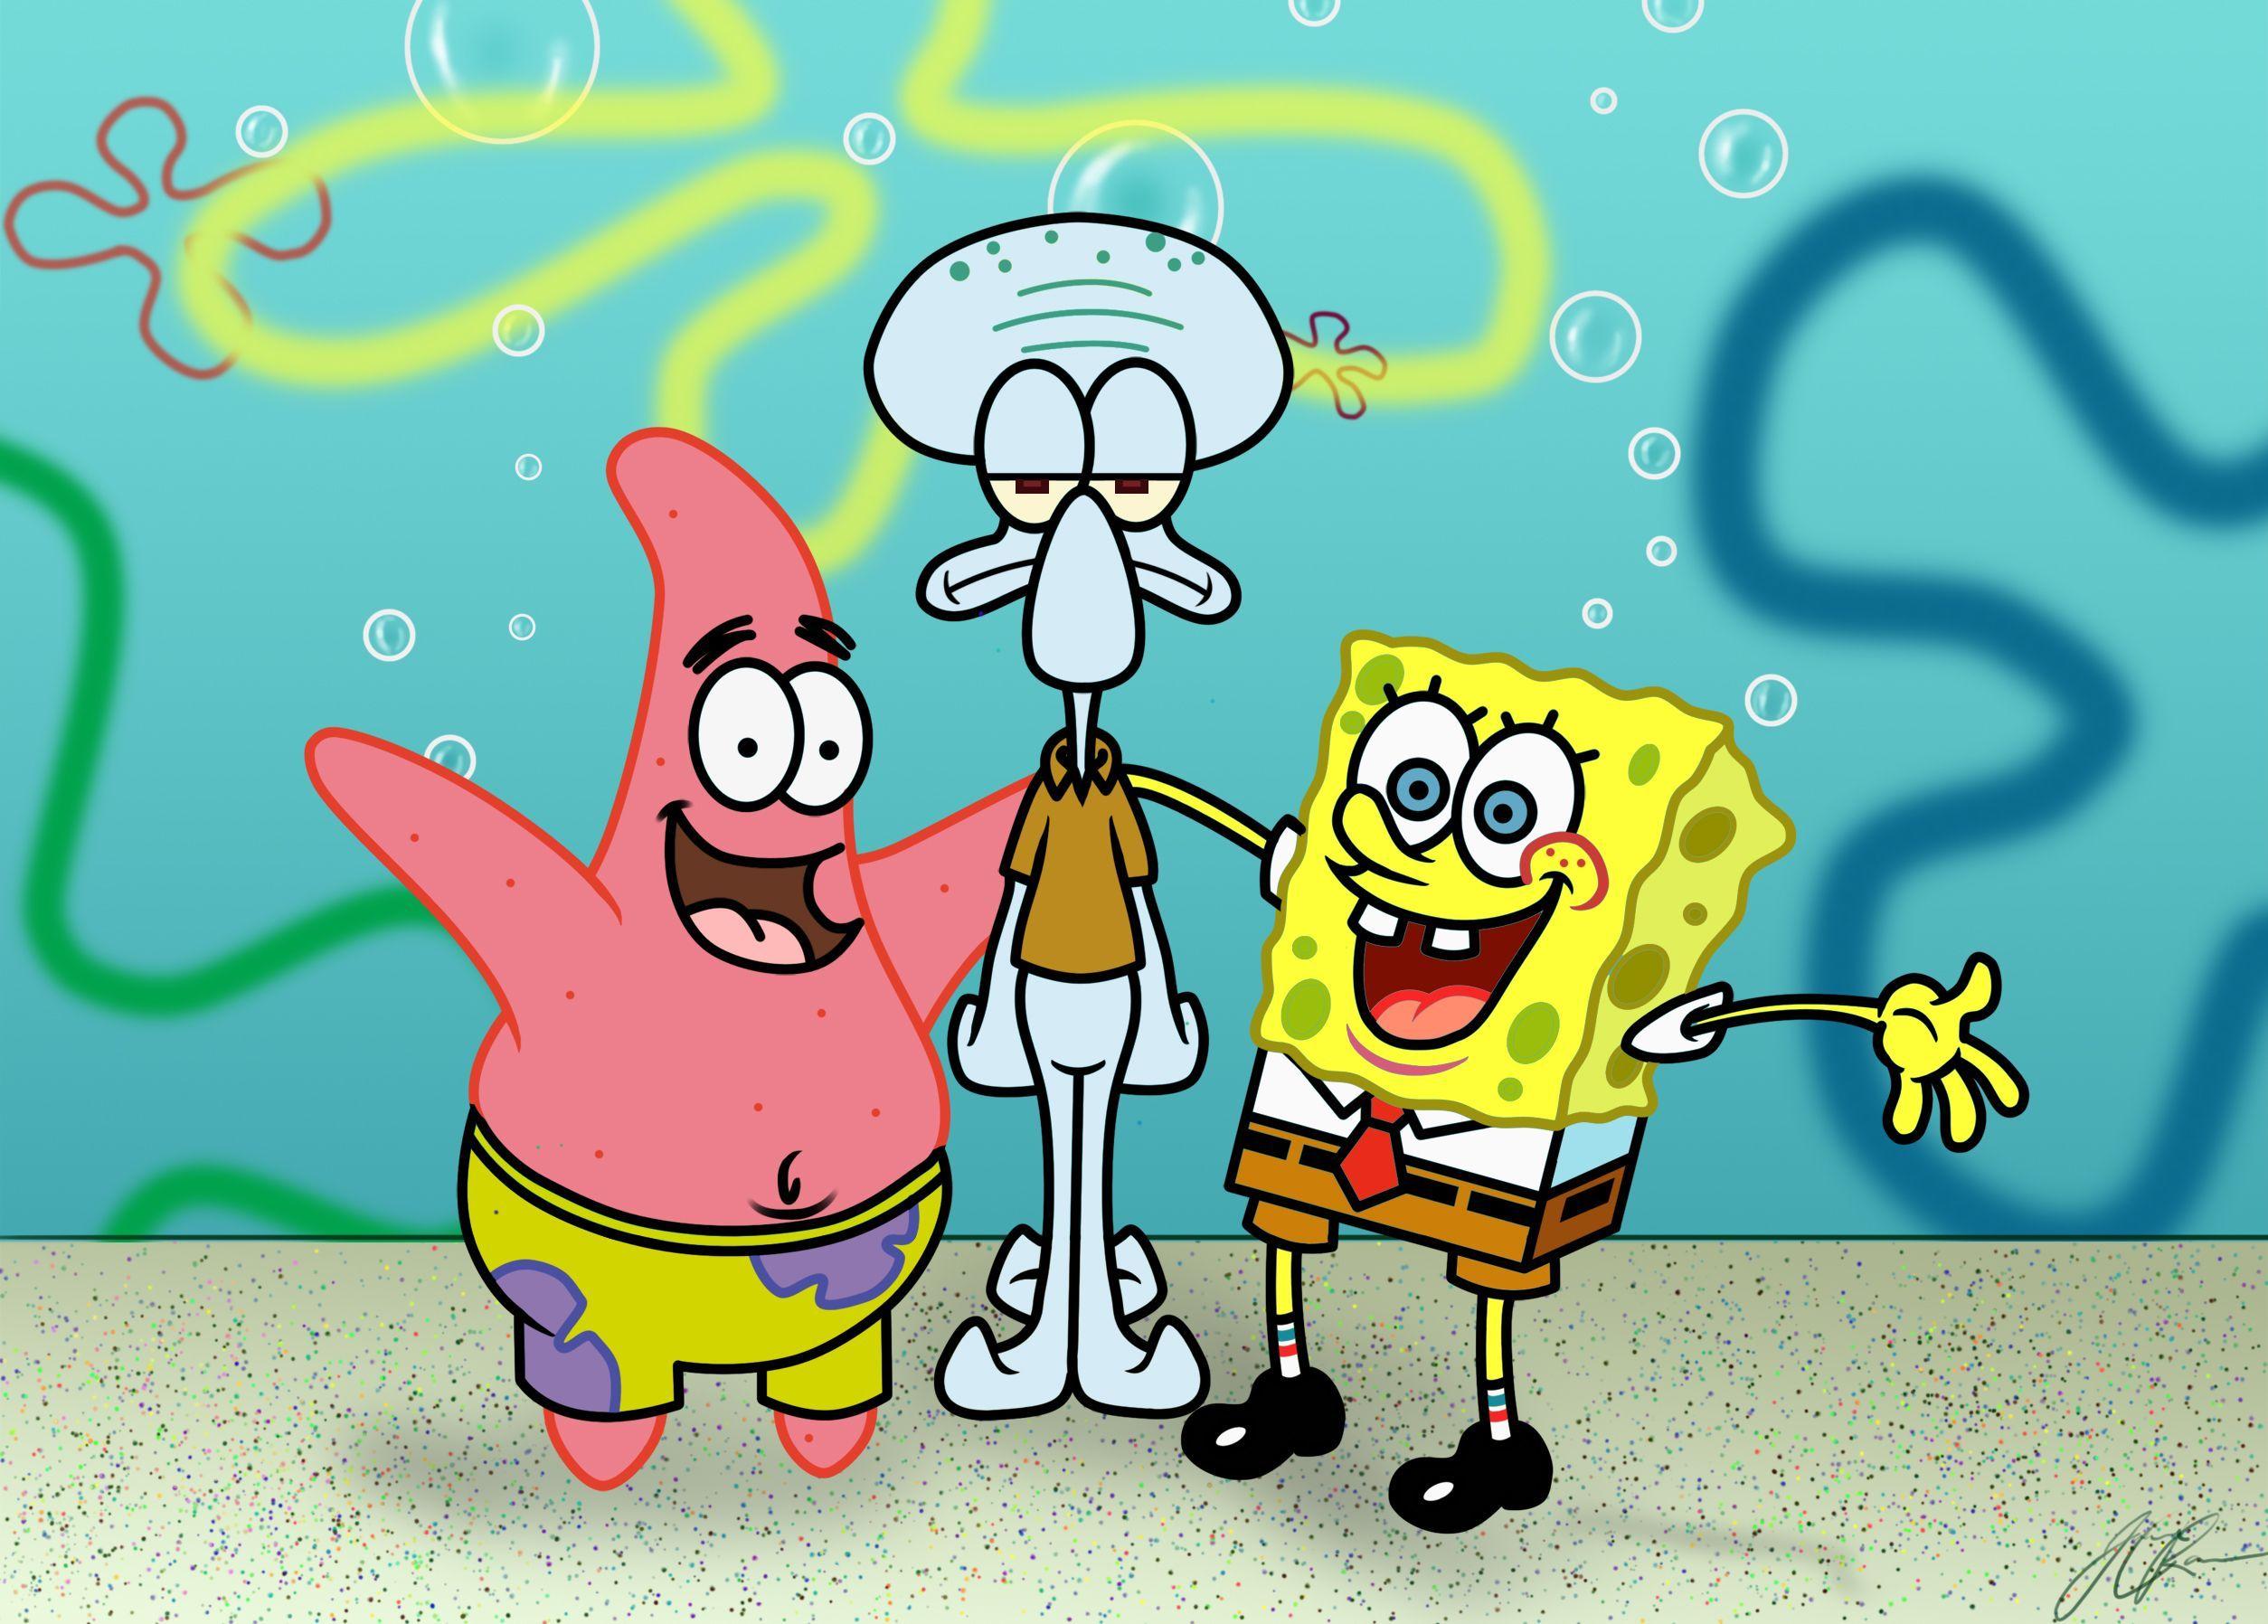 Patrick, Squidward and Spongebob are ready for a new adventure - Squidward